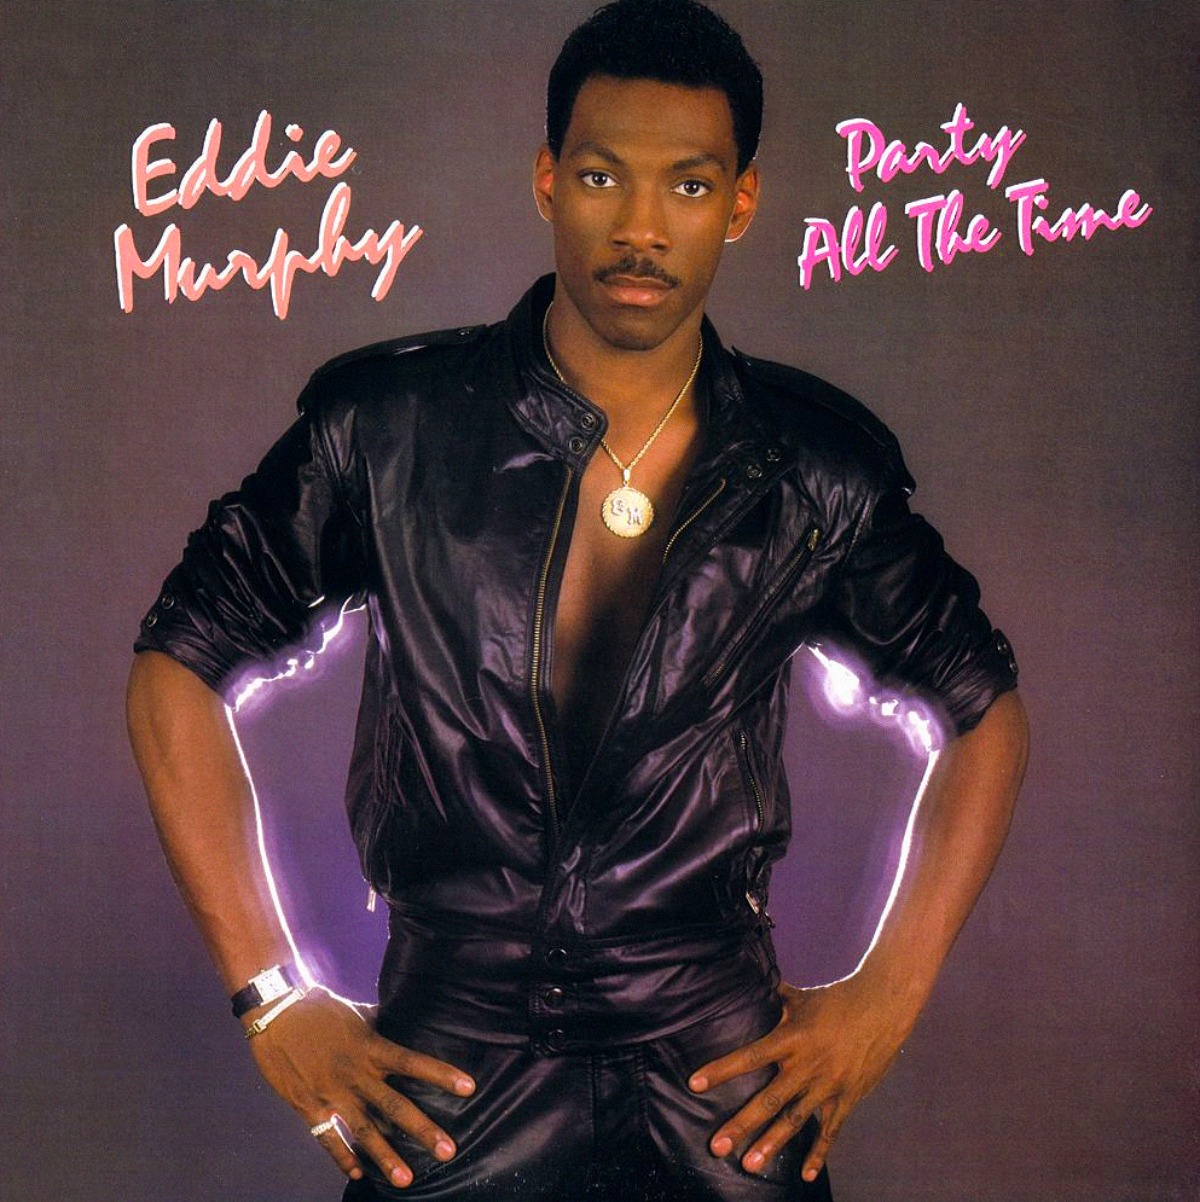 Cover von Eddie Murphys Single 'Party All the Time'